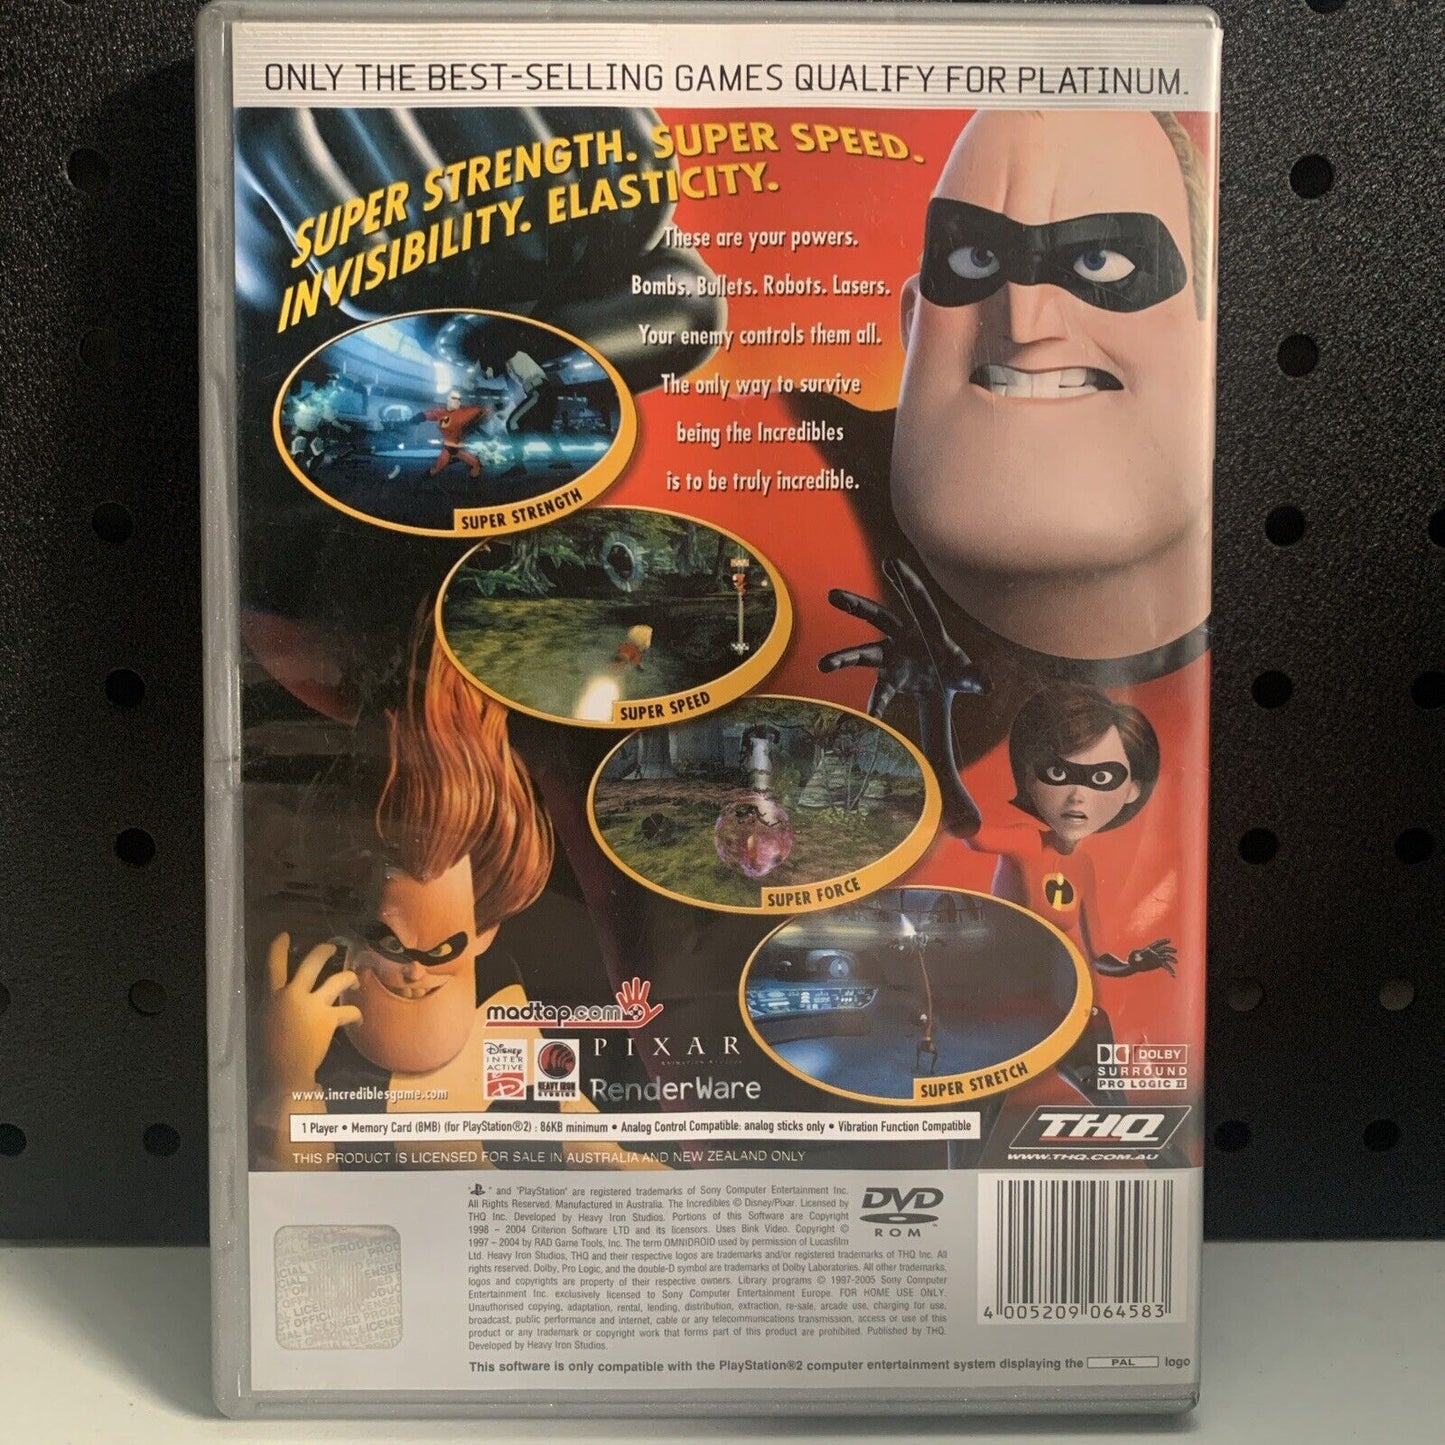 The Incredibles PlayStation 2 PS2 Game